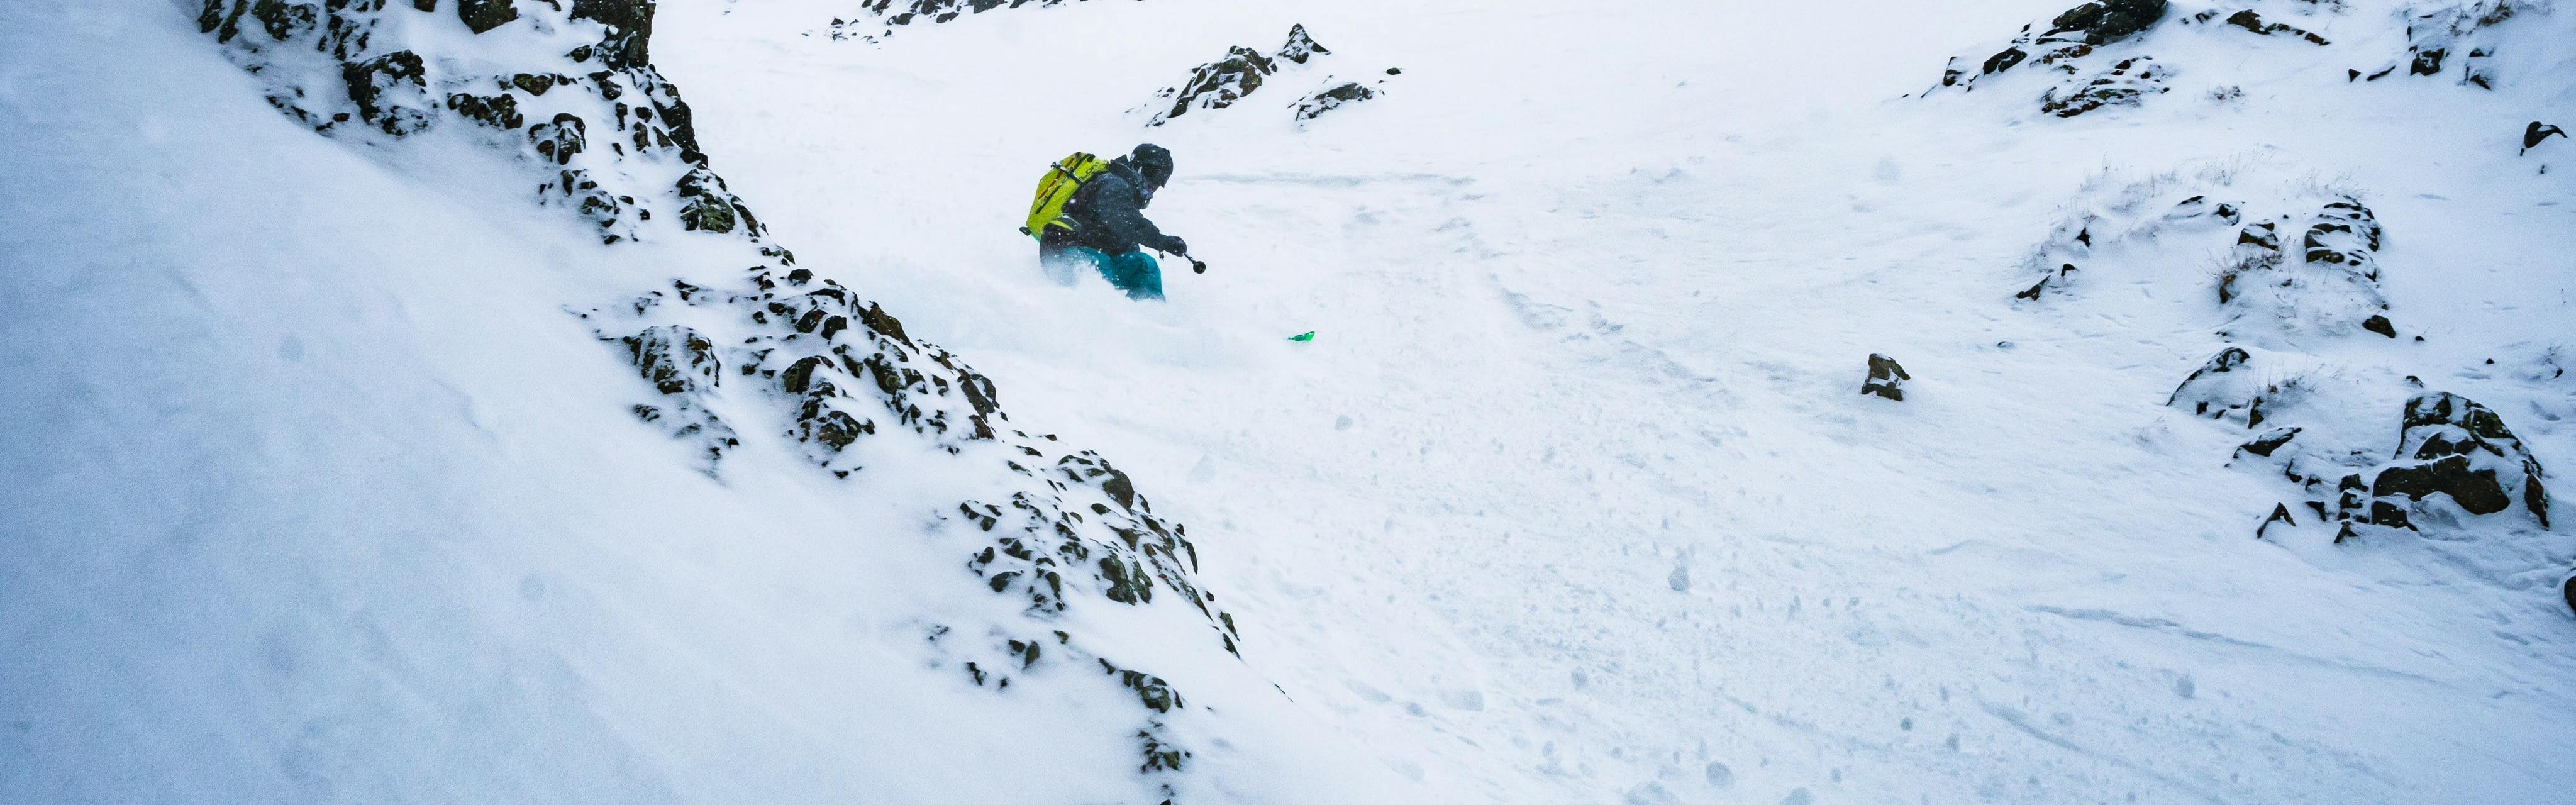 A skier turning down a chute.